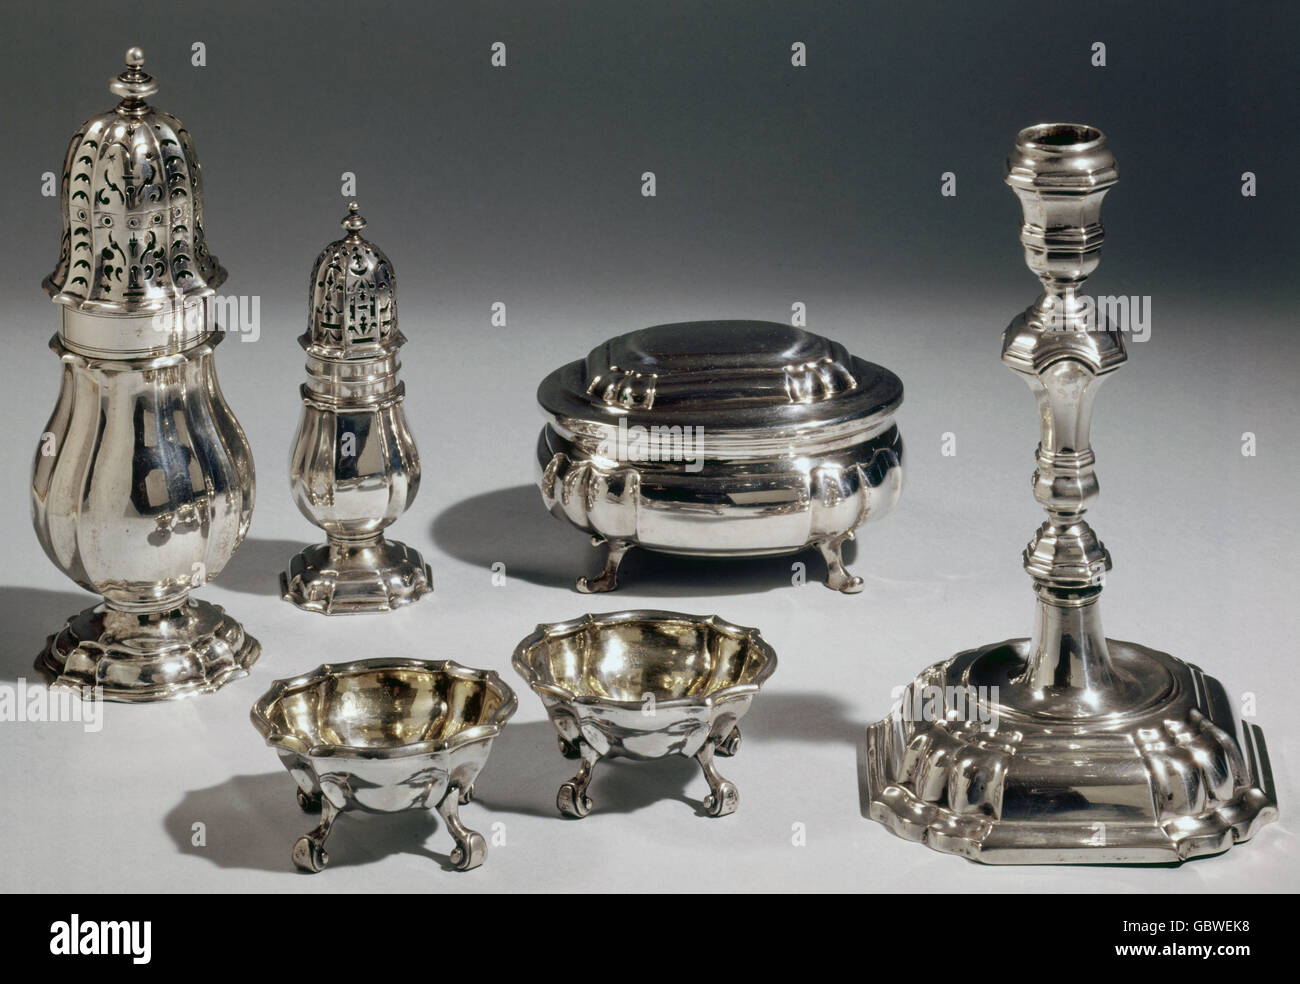 fine arts, antiquities, silverware of Celle master, 18th century, Bomann museum, Celle, Stock Photo